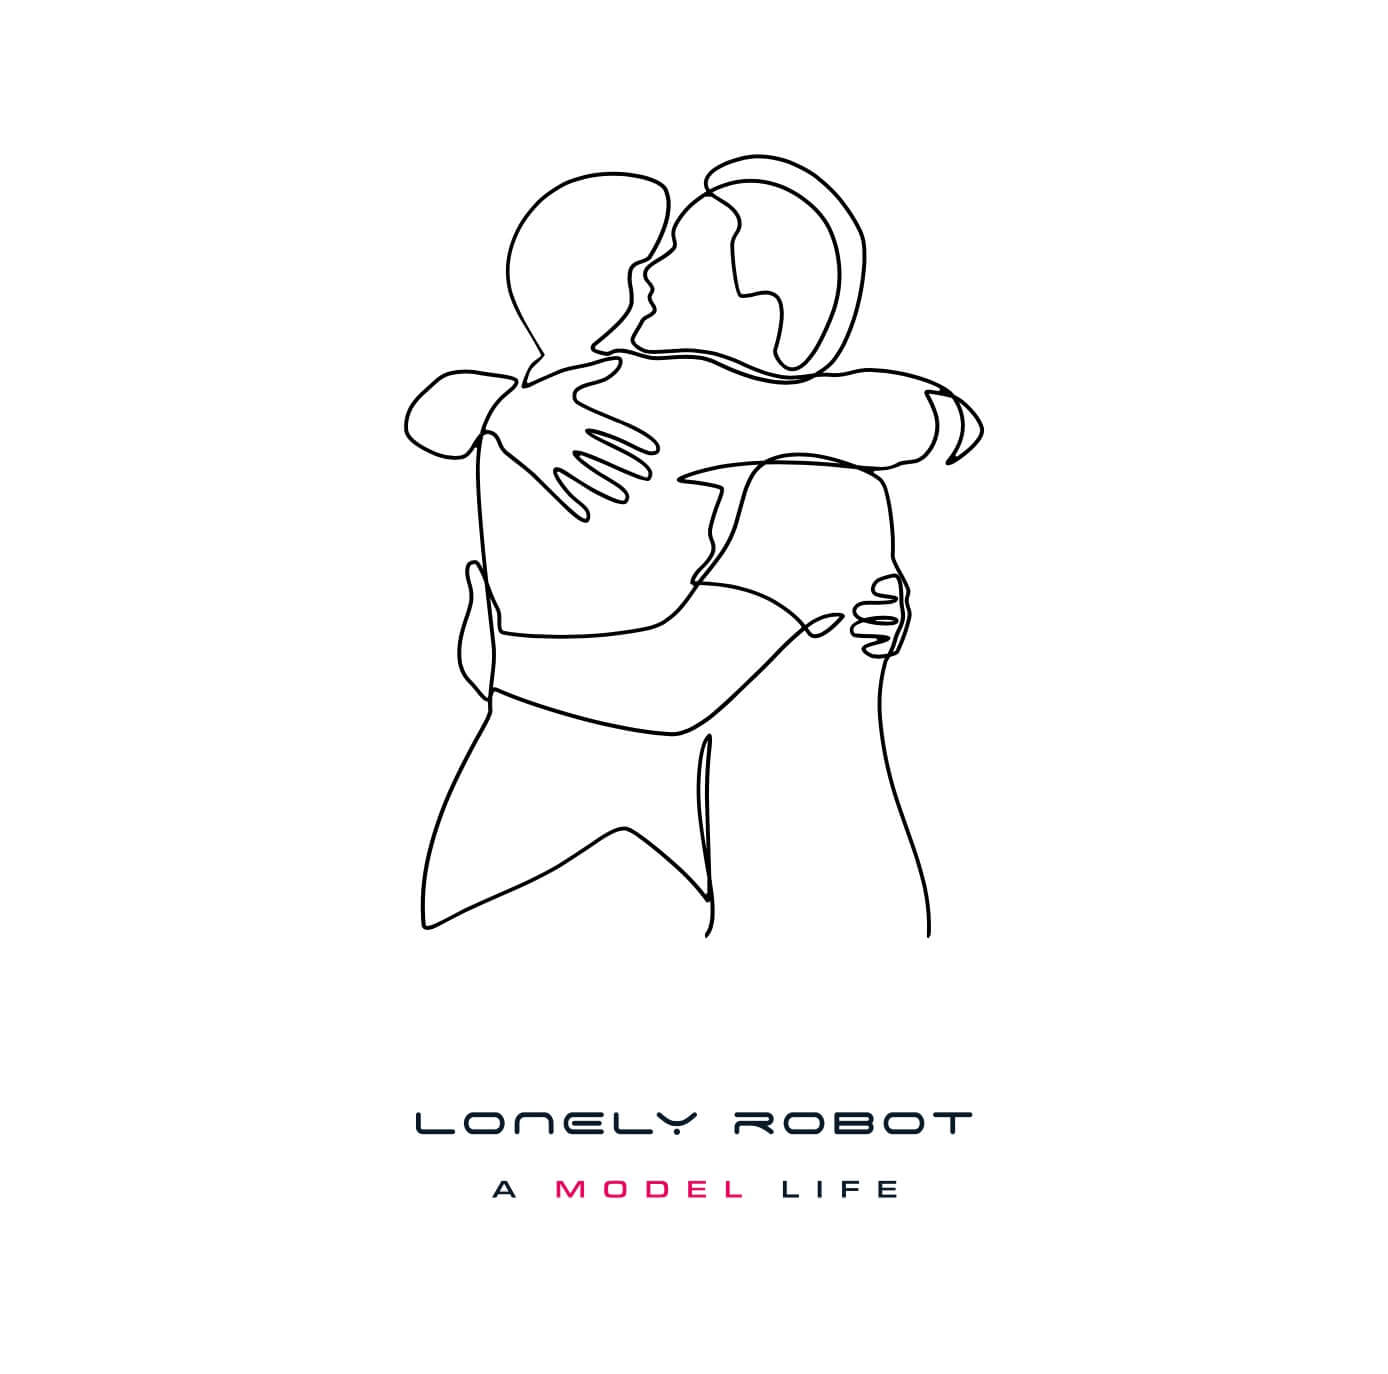 A Model Life - LONELY ROBOT